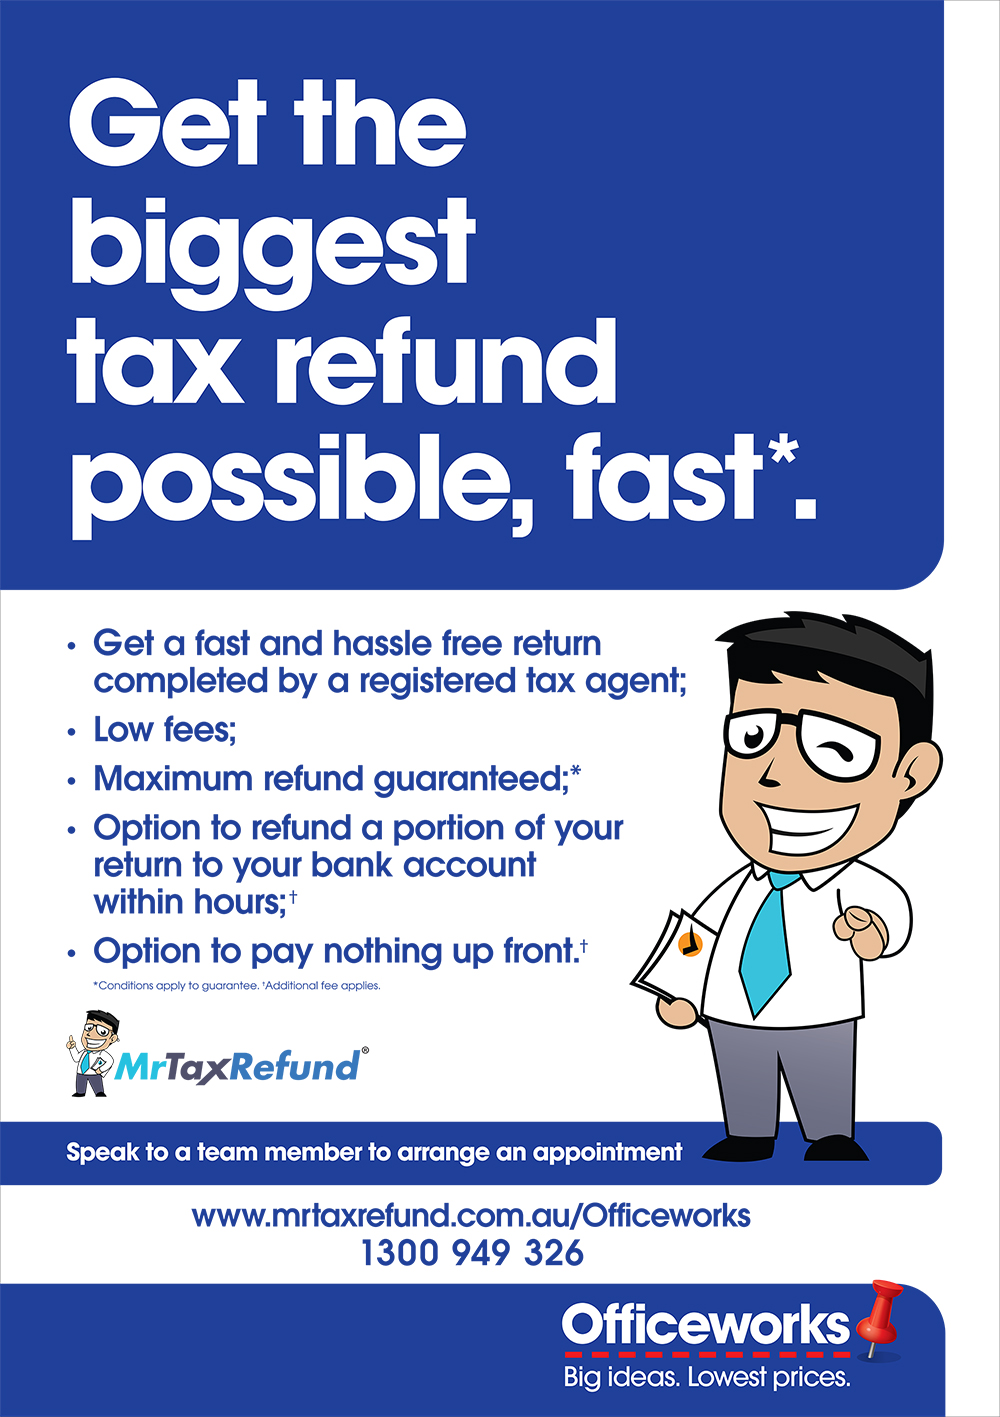 officeworks-launch-tax-return-service-from-july-1